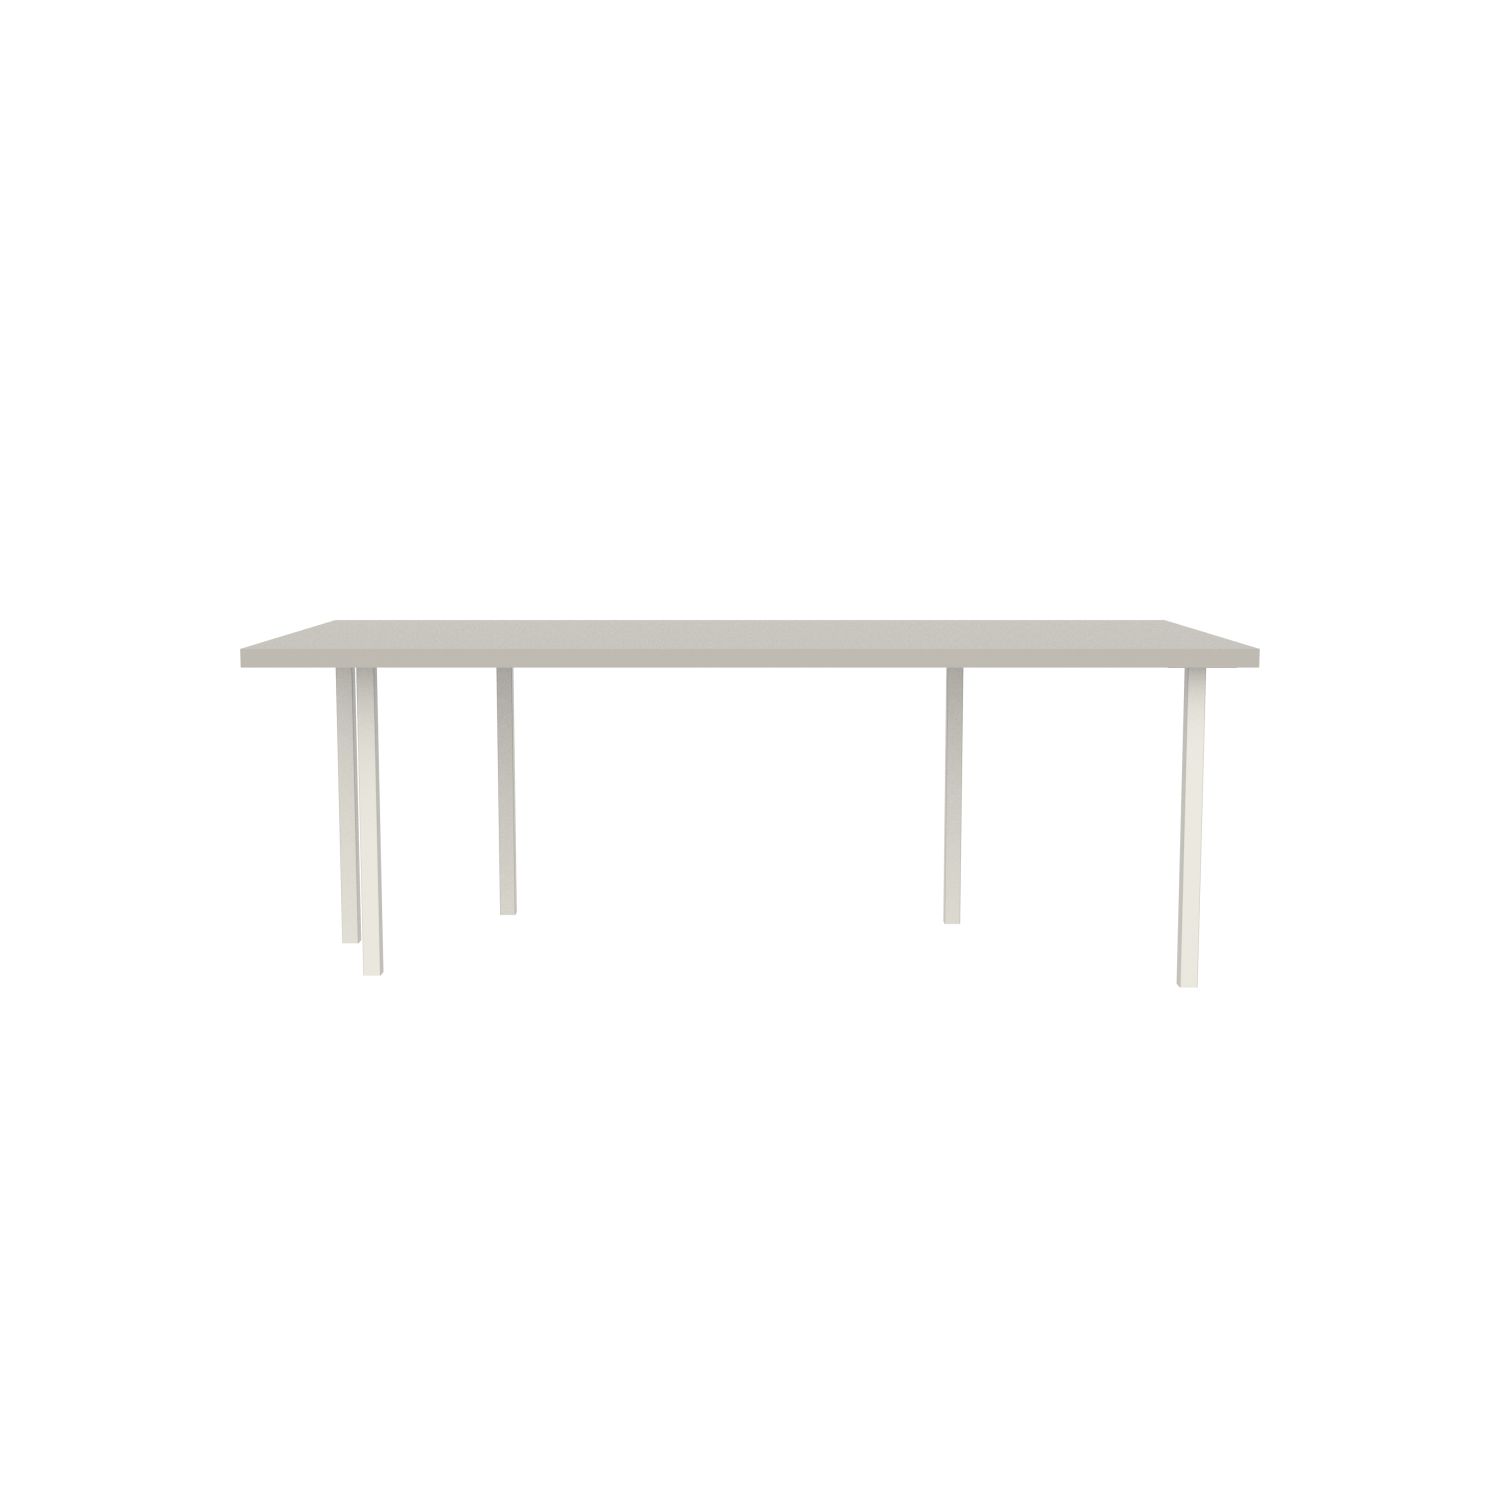 lensvelt bbrand table five fixed heigt 103x218 hpl white 50 mm price level 1 white ral9010